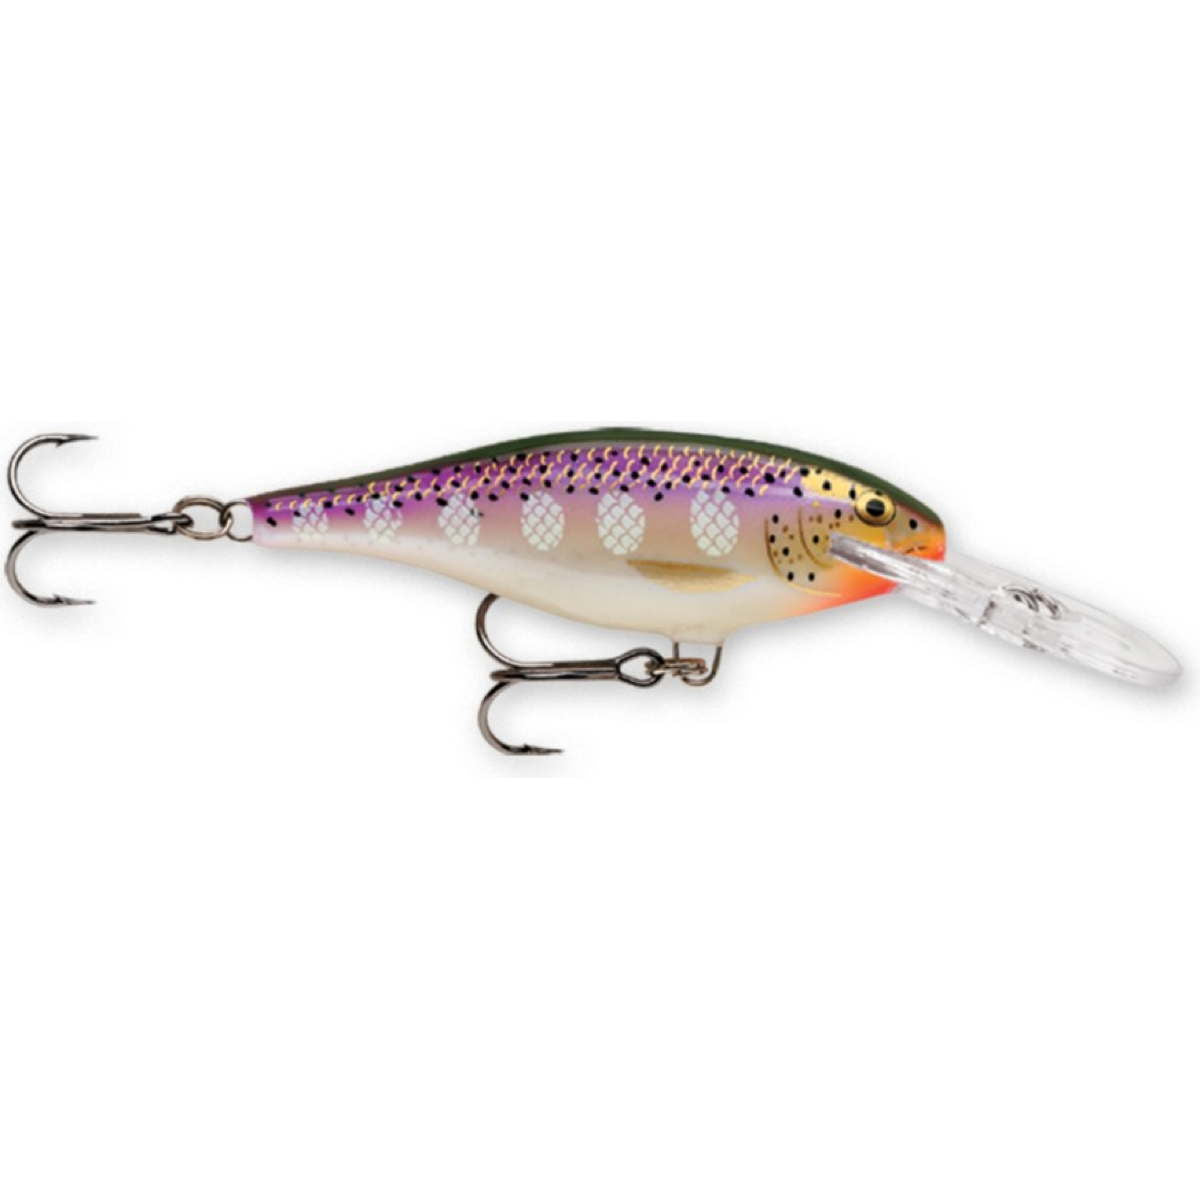 Photo of Rapala Shad Rap Lure for sale at United Tackle Shops.